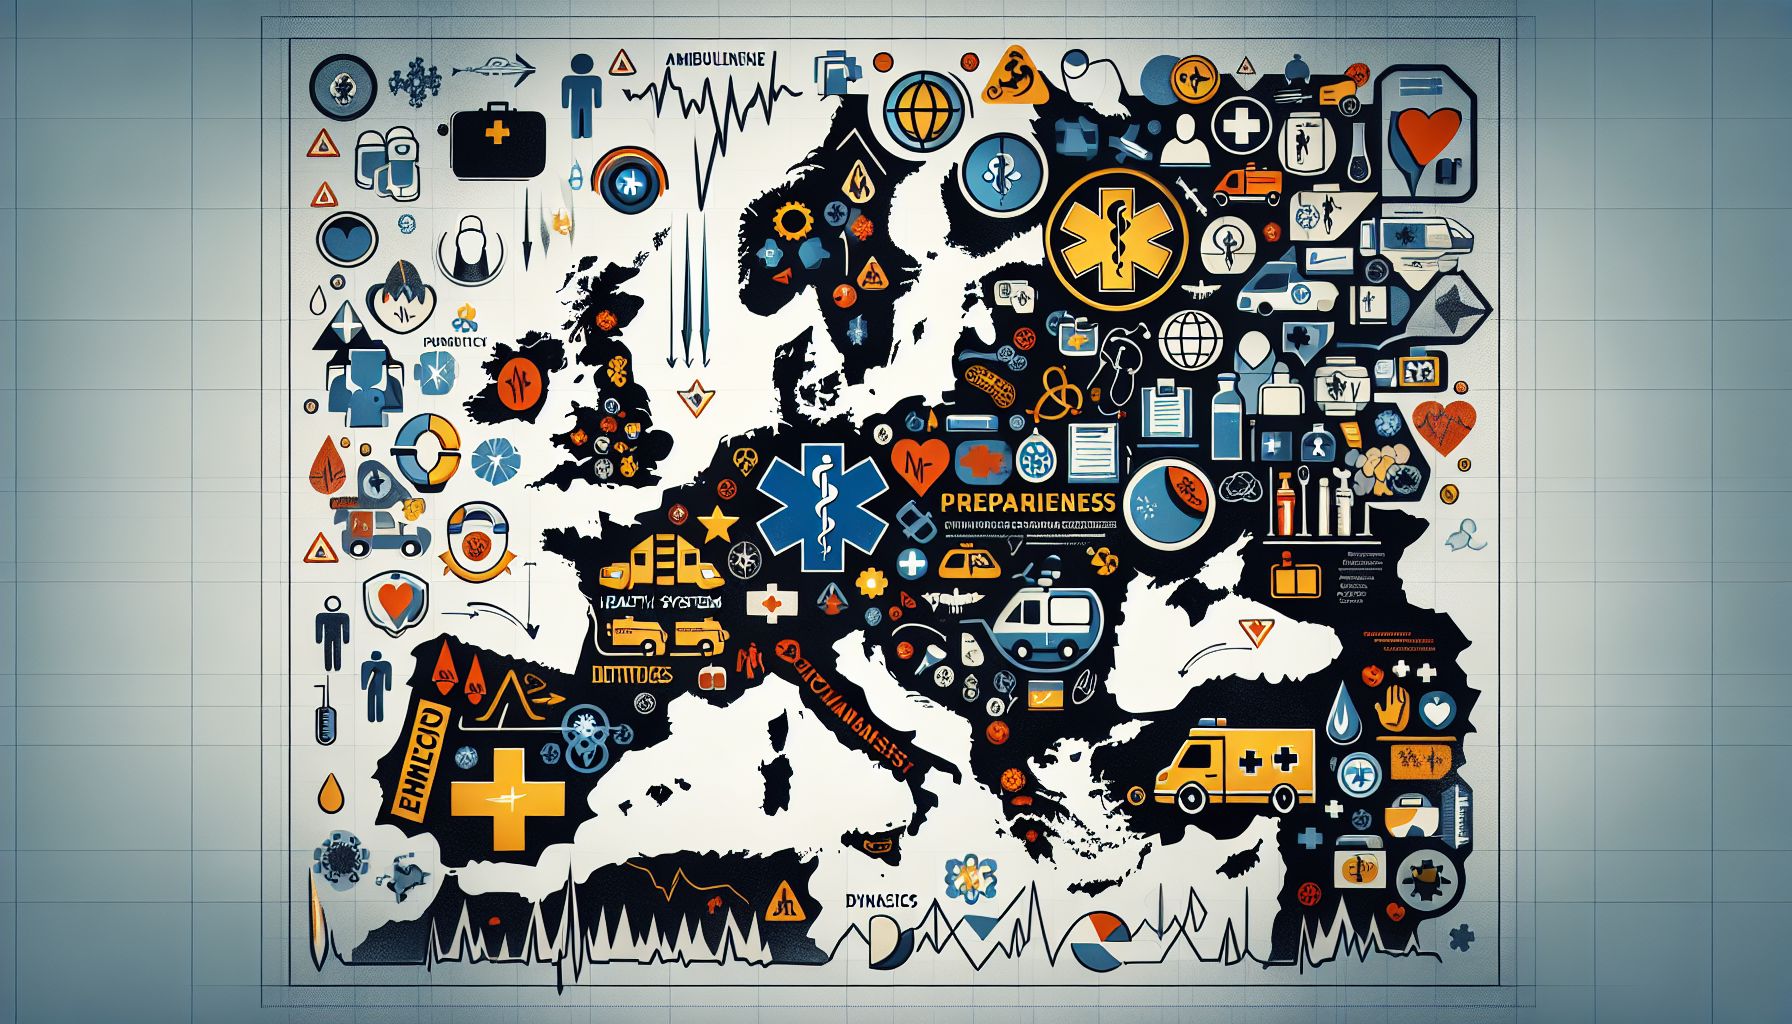 The Preparedness and Response of European Health Systems: A Critical Analysis